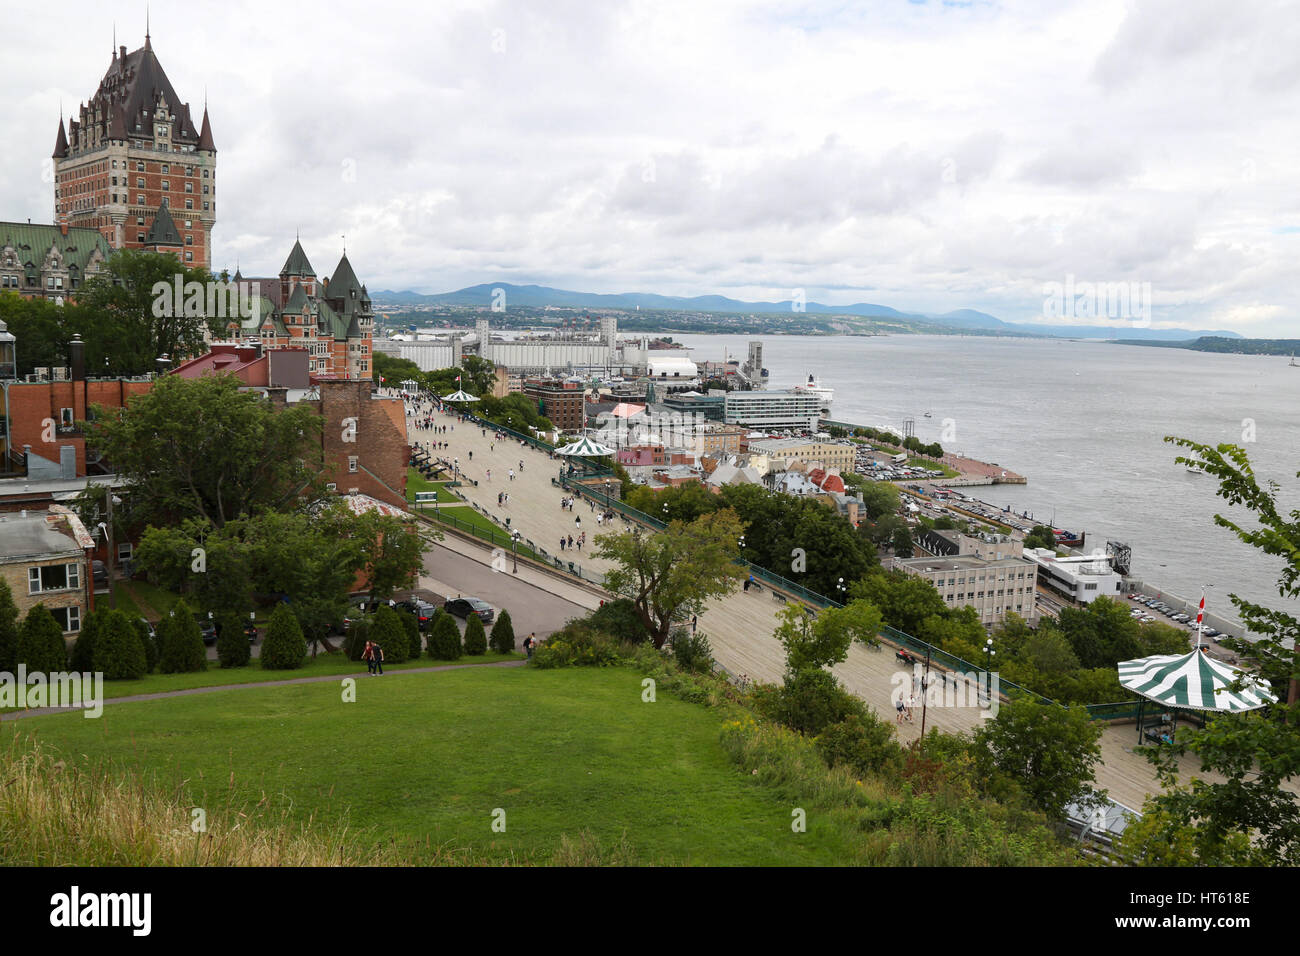 Saint Lawrence River Seen From the Fort in Old Quebec City Stock Photo